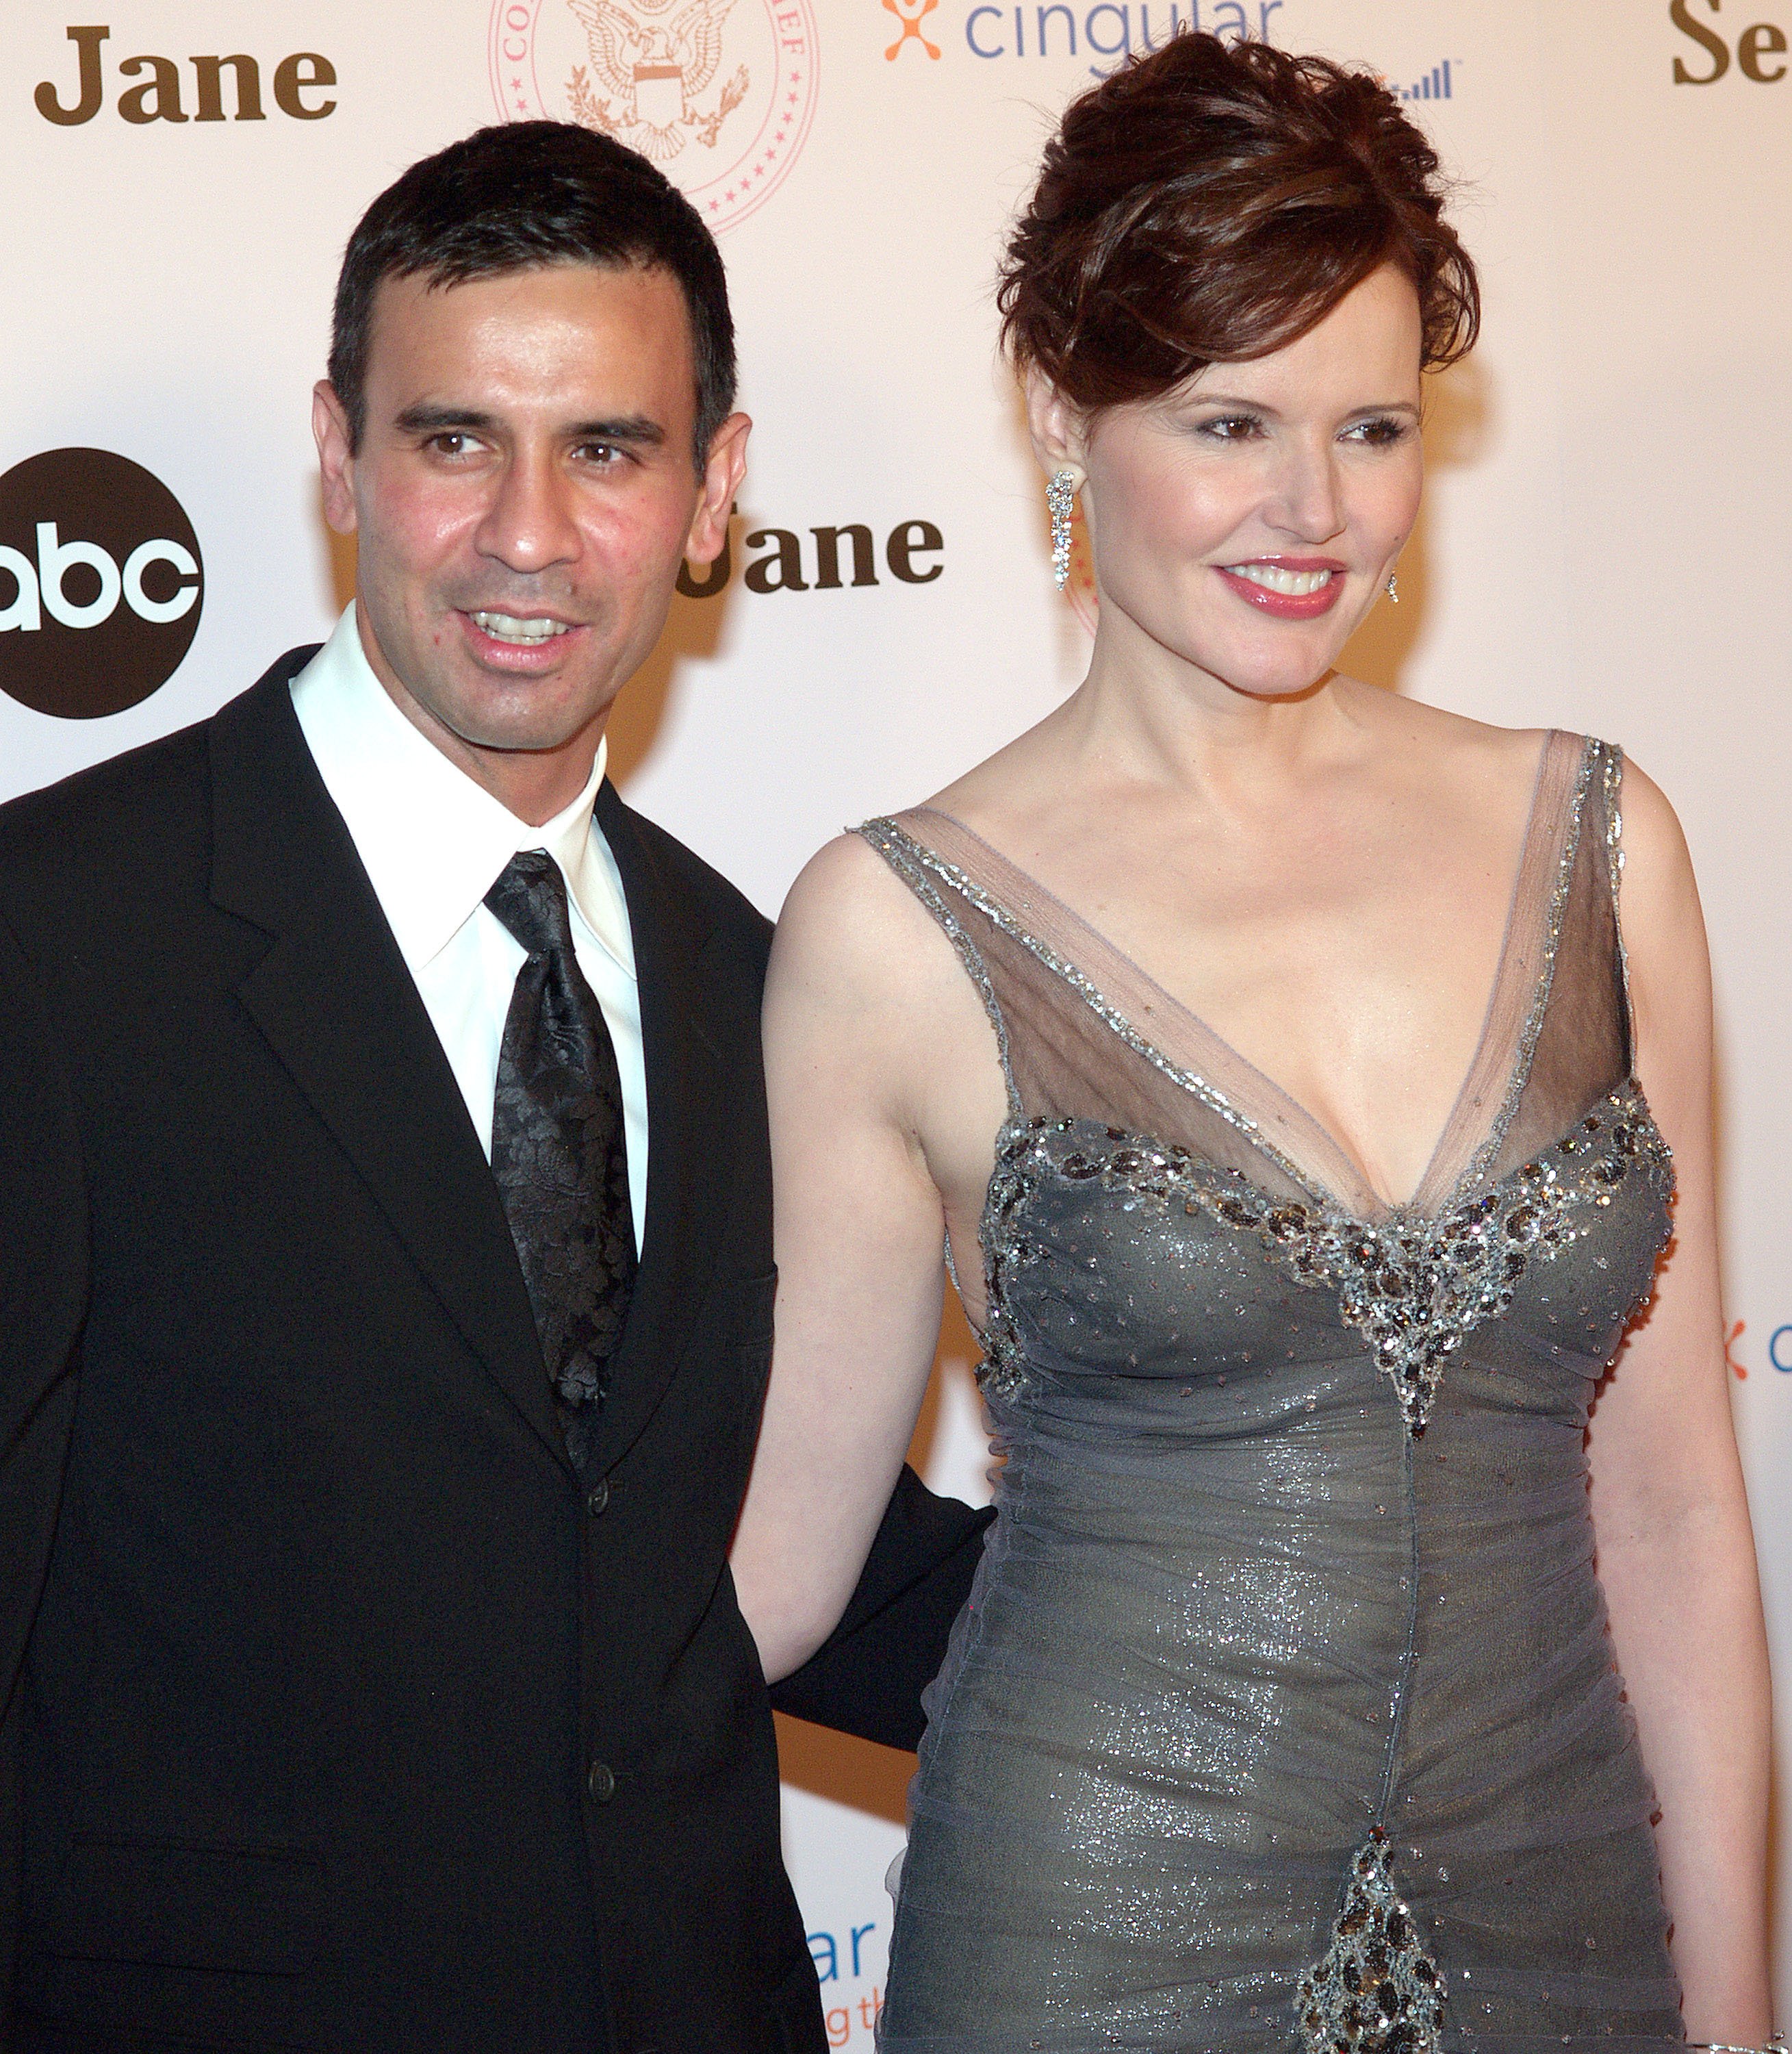 Dr. Reza Jarrahy and Geena Davis at the inaugural ball and premiere screening of "Commander-in-Chief" on September 21, 2005 | Source: Getty Images